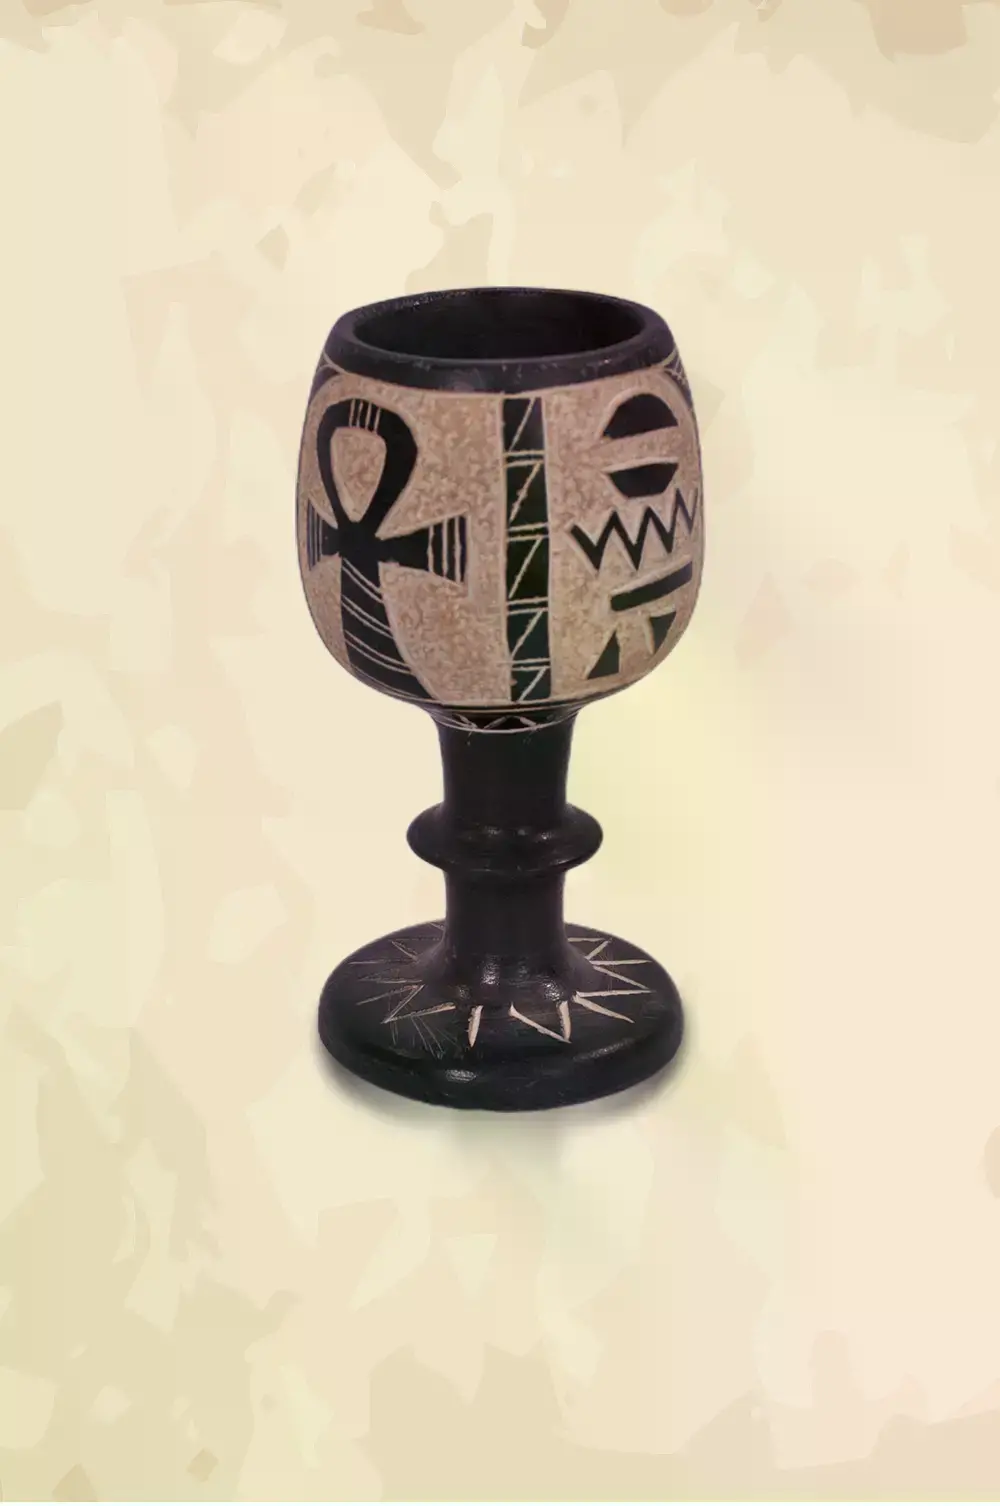 Basalt stone black and white cup with egyptian hieroglyphics